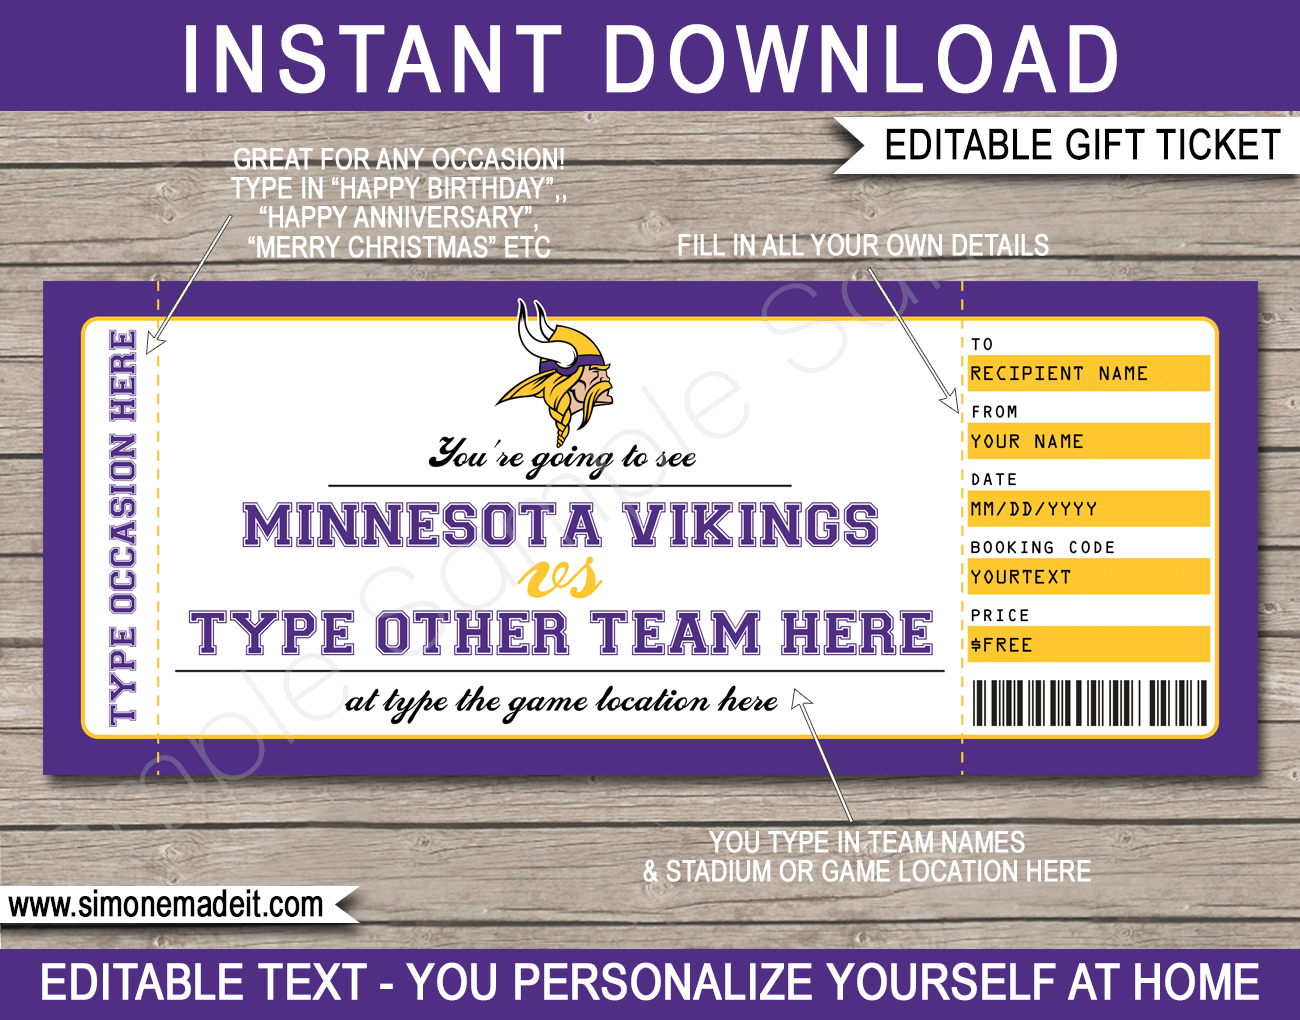 Limited Vikings Single-Game Tickets Go On Sale July 18